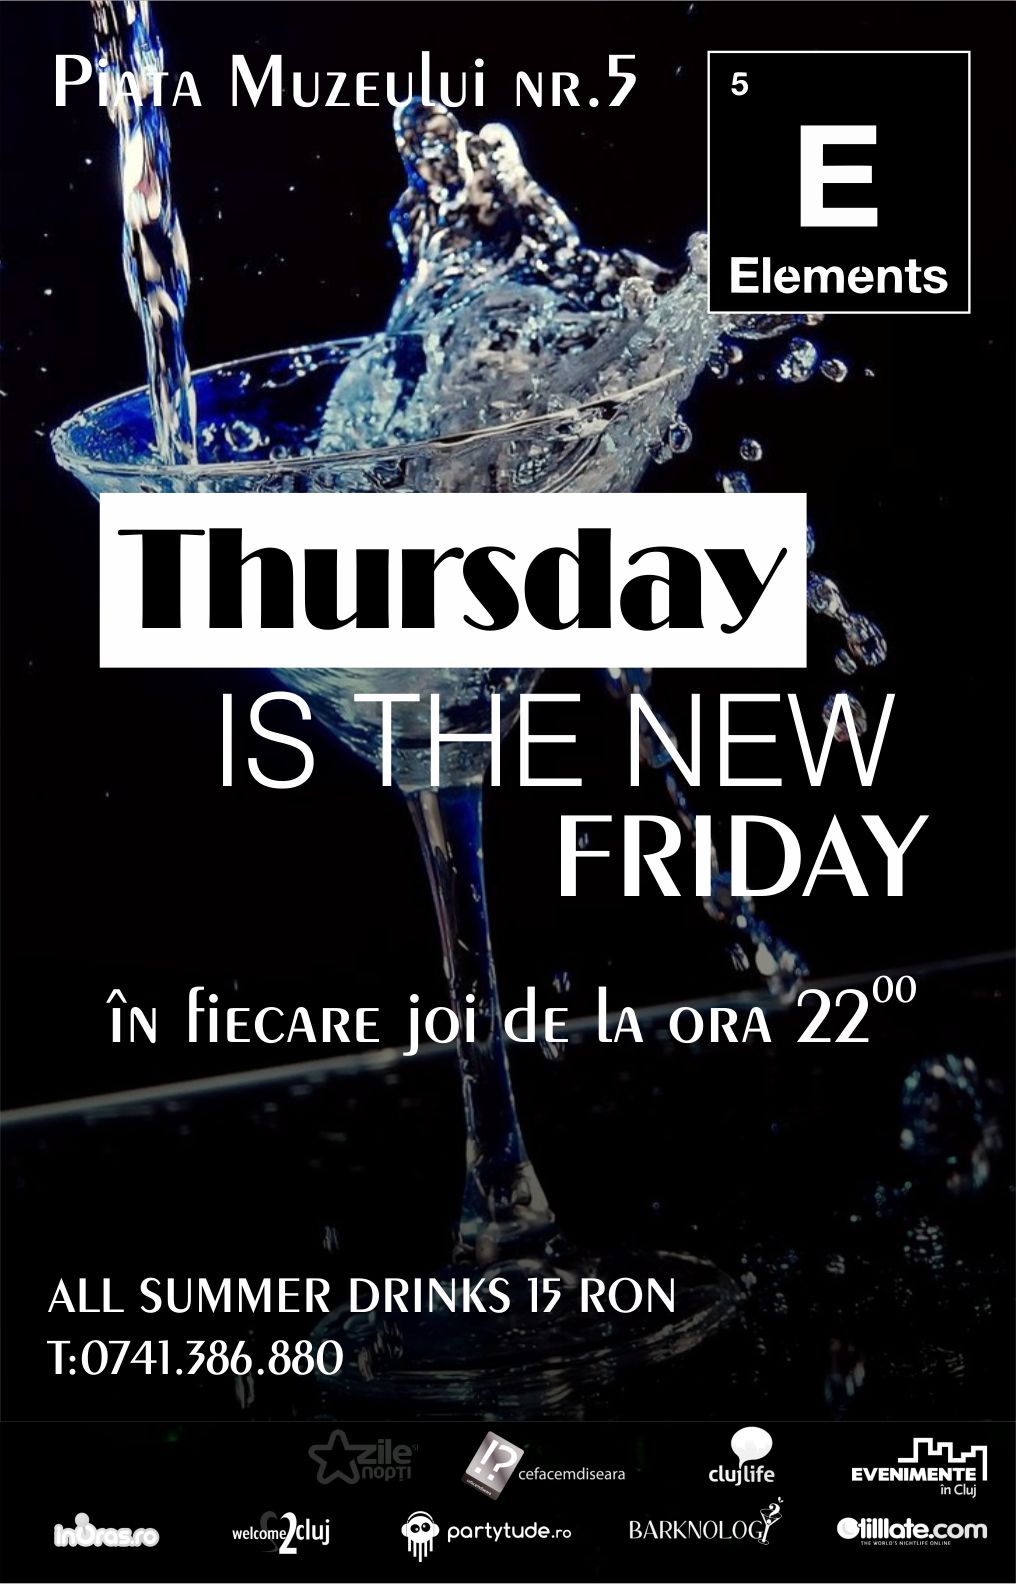 Thursday Is The New Friday @ Elements Cocktail Bar